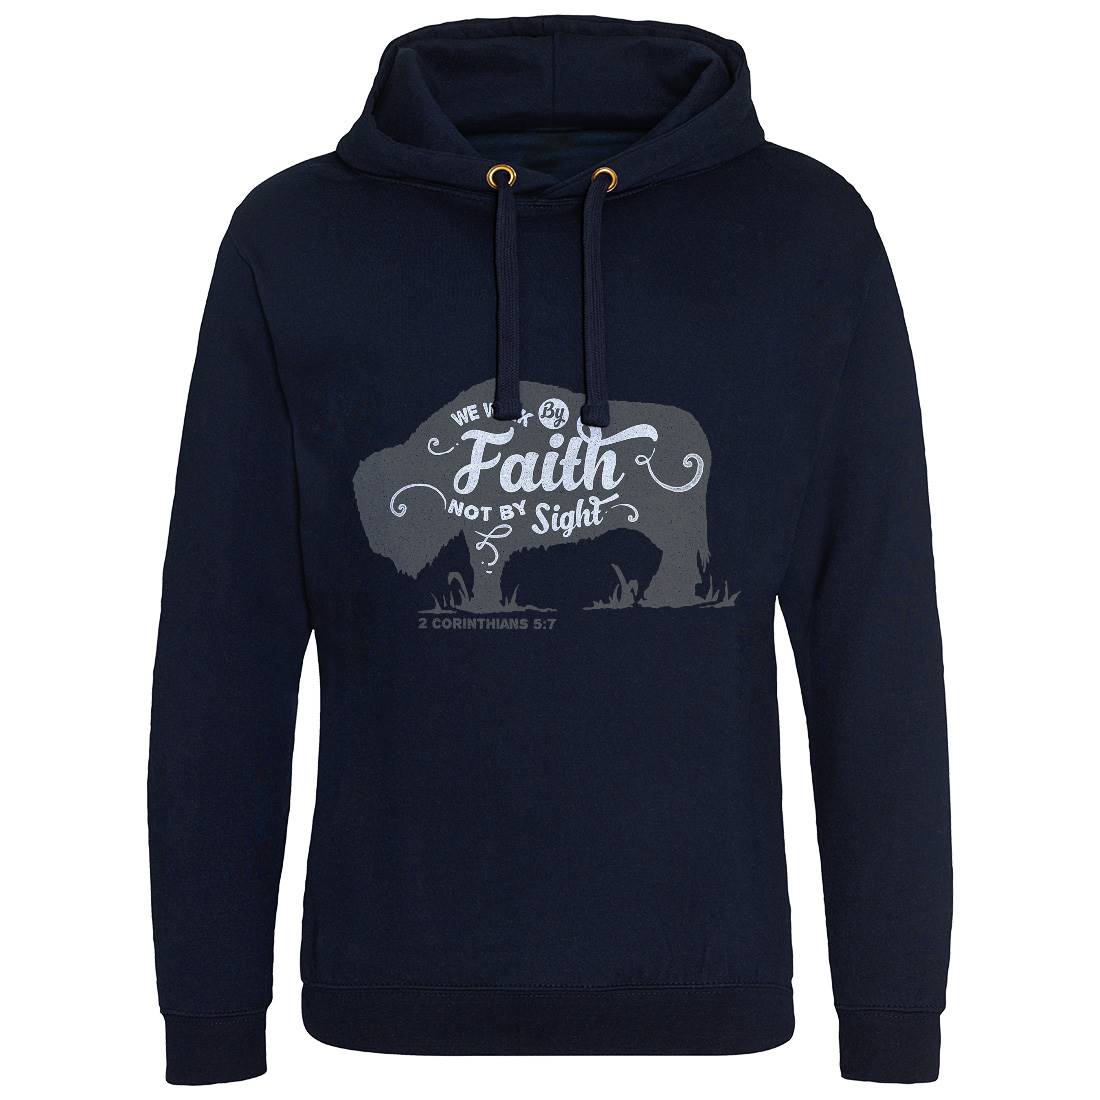 We Walk By Faith Mens Hoodie Without Pocket Religion A392